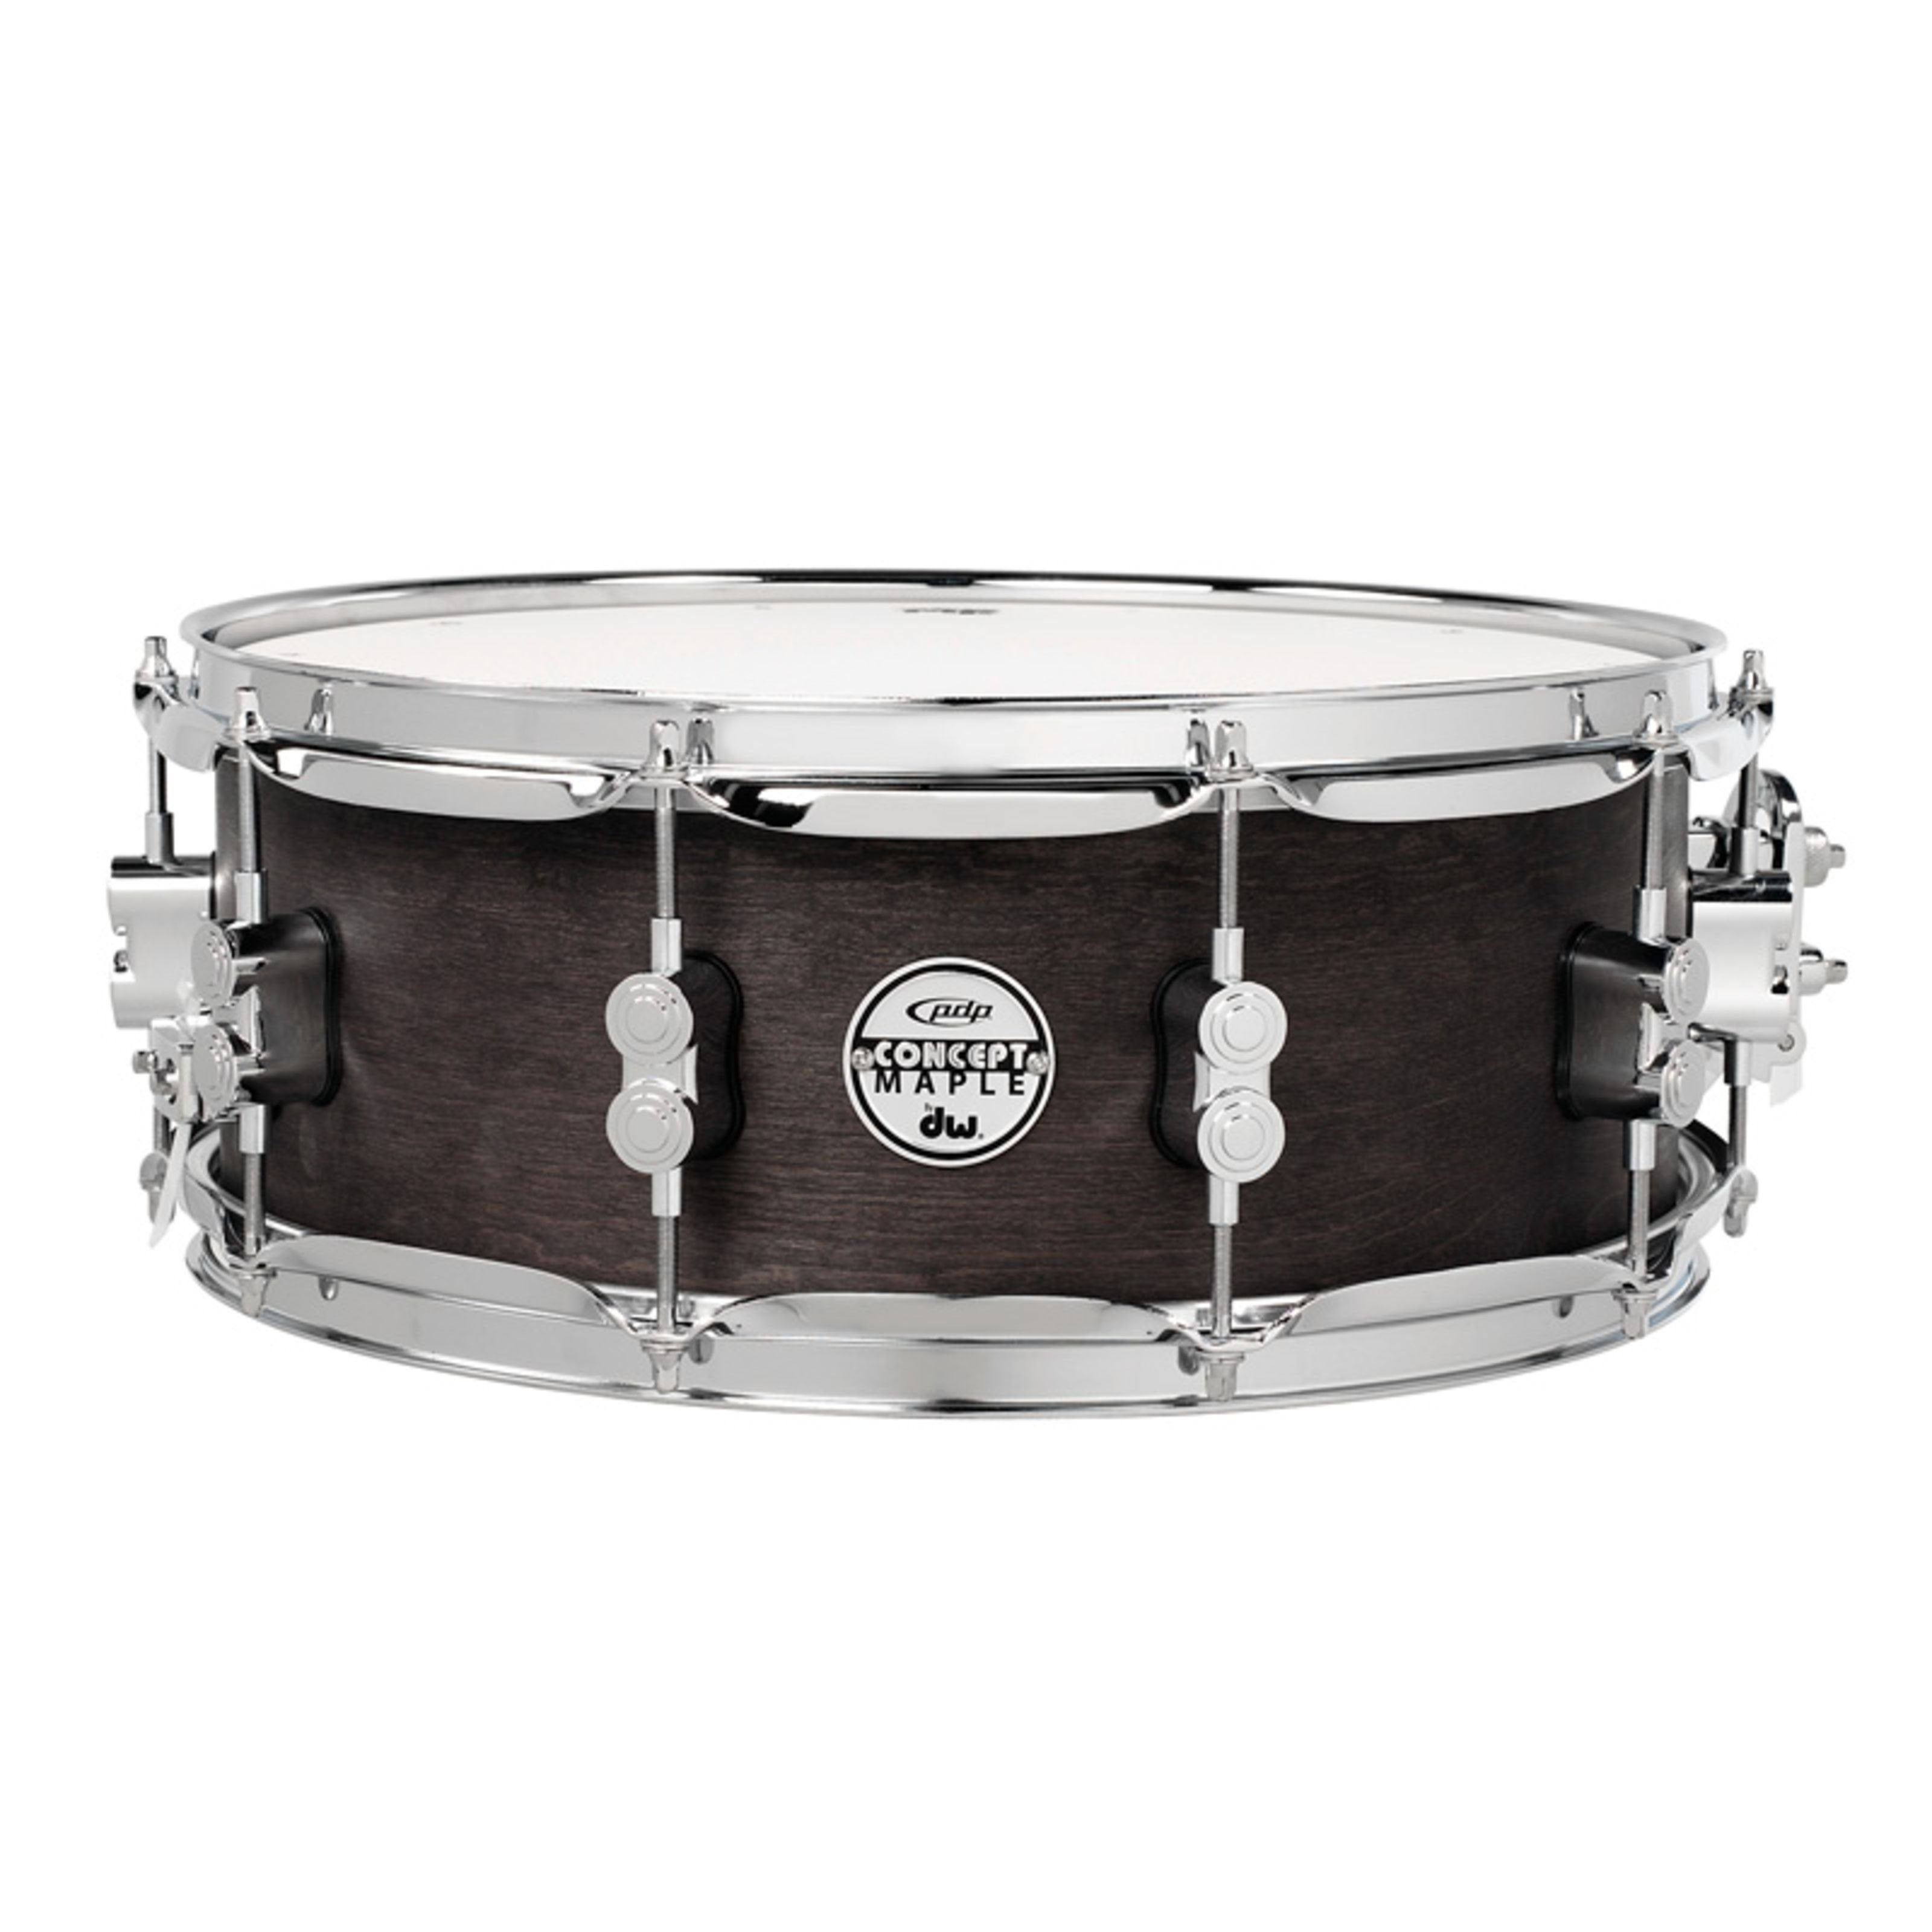 pdp Snare Drum,Black Wax Snare 14"x55", Schlagzeuge, Snare Drums, Black Wax Snare 14"x5,5" - Snare Drum